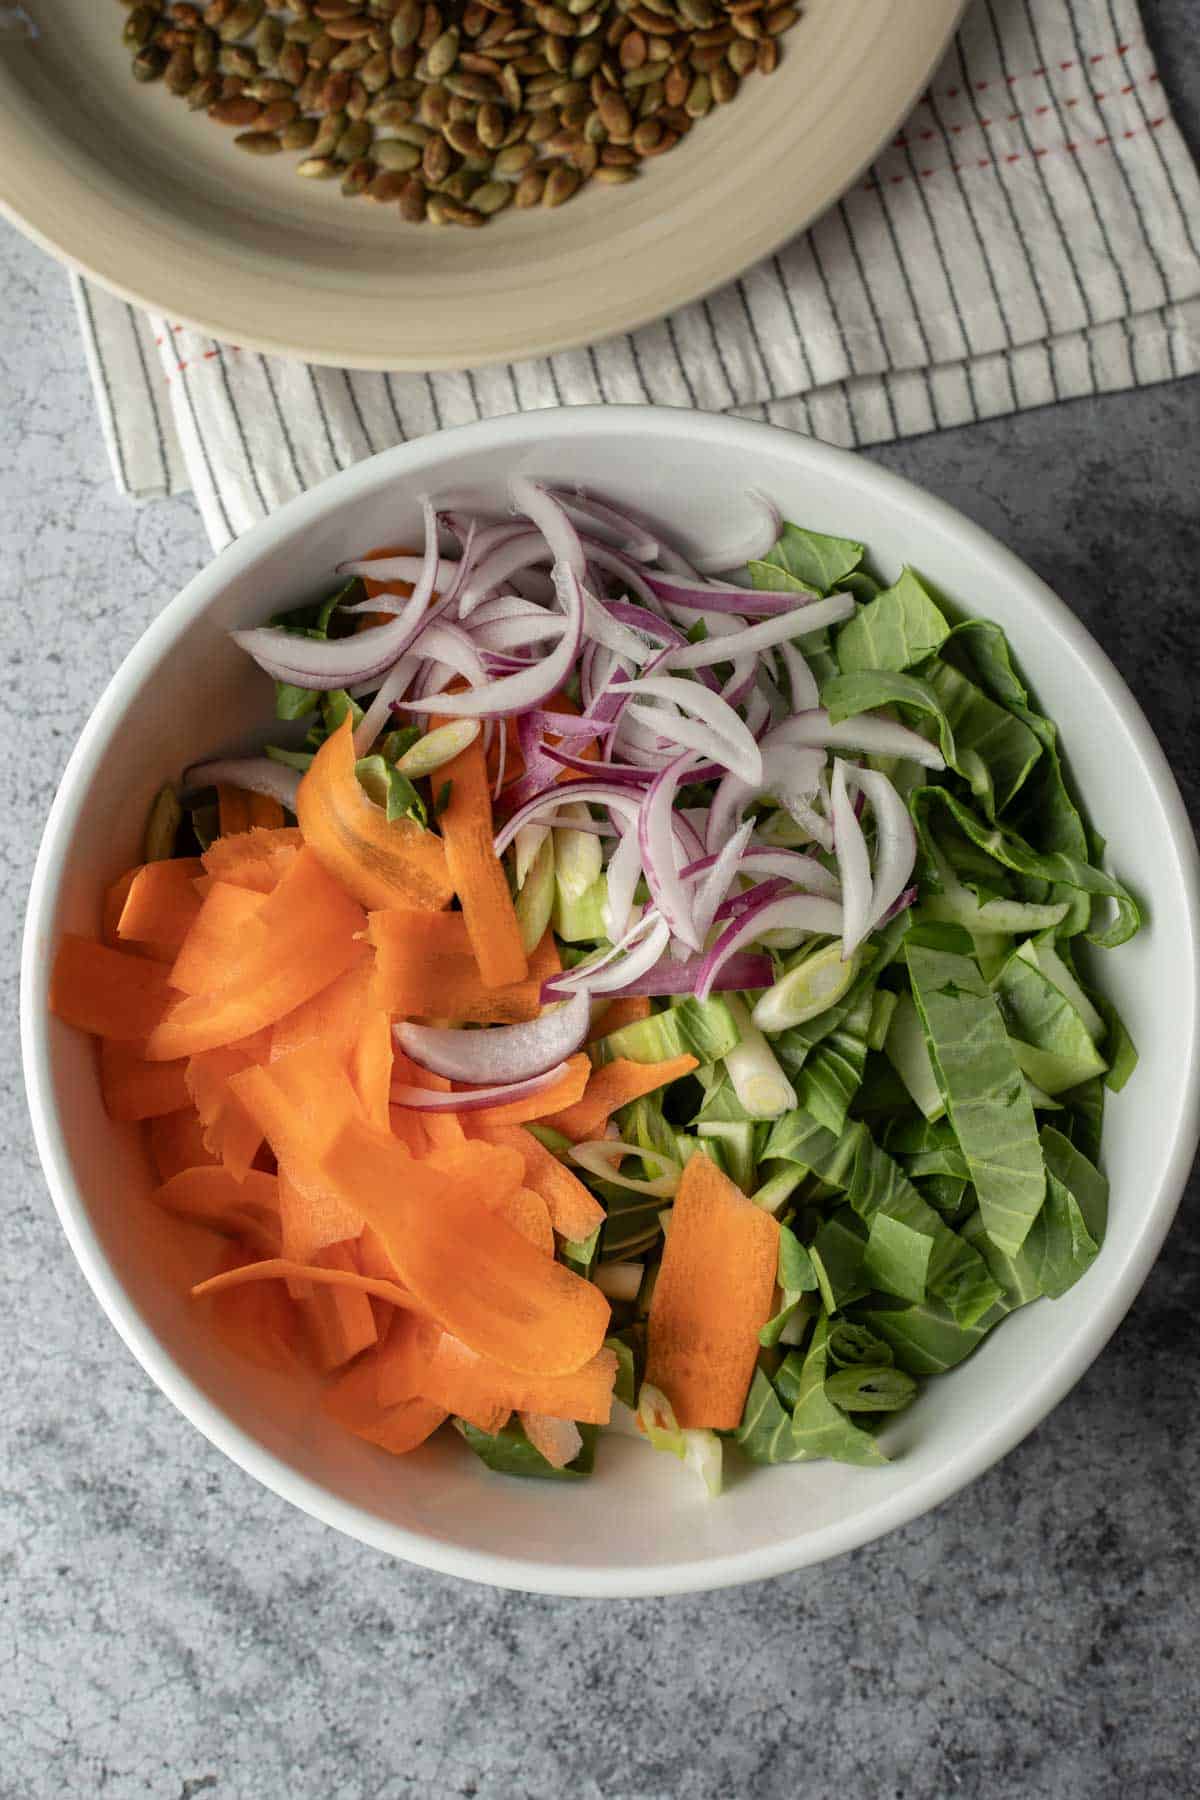 Assembling the salad in a large bowl.